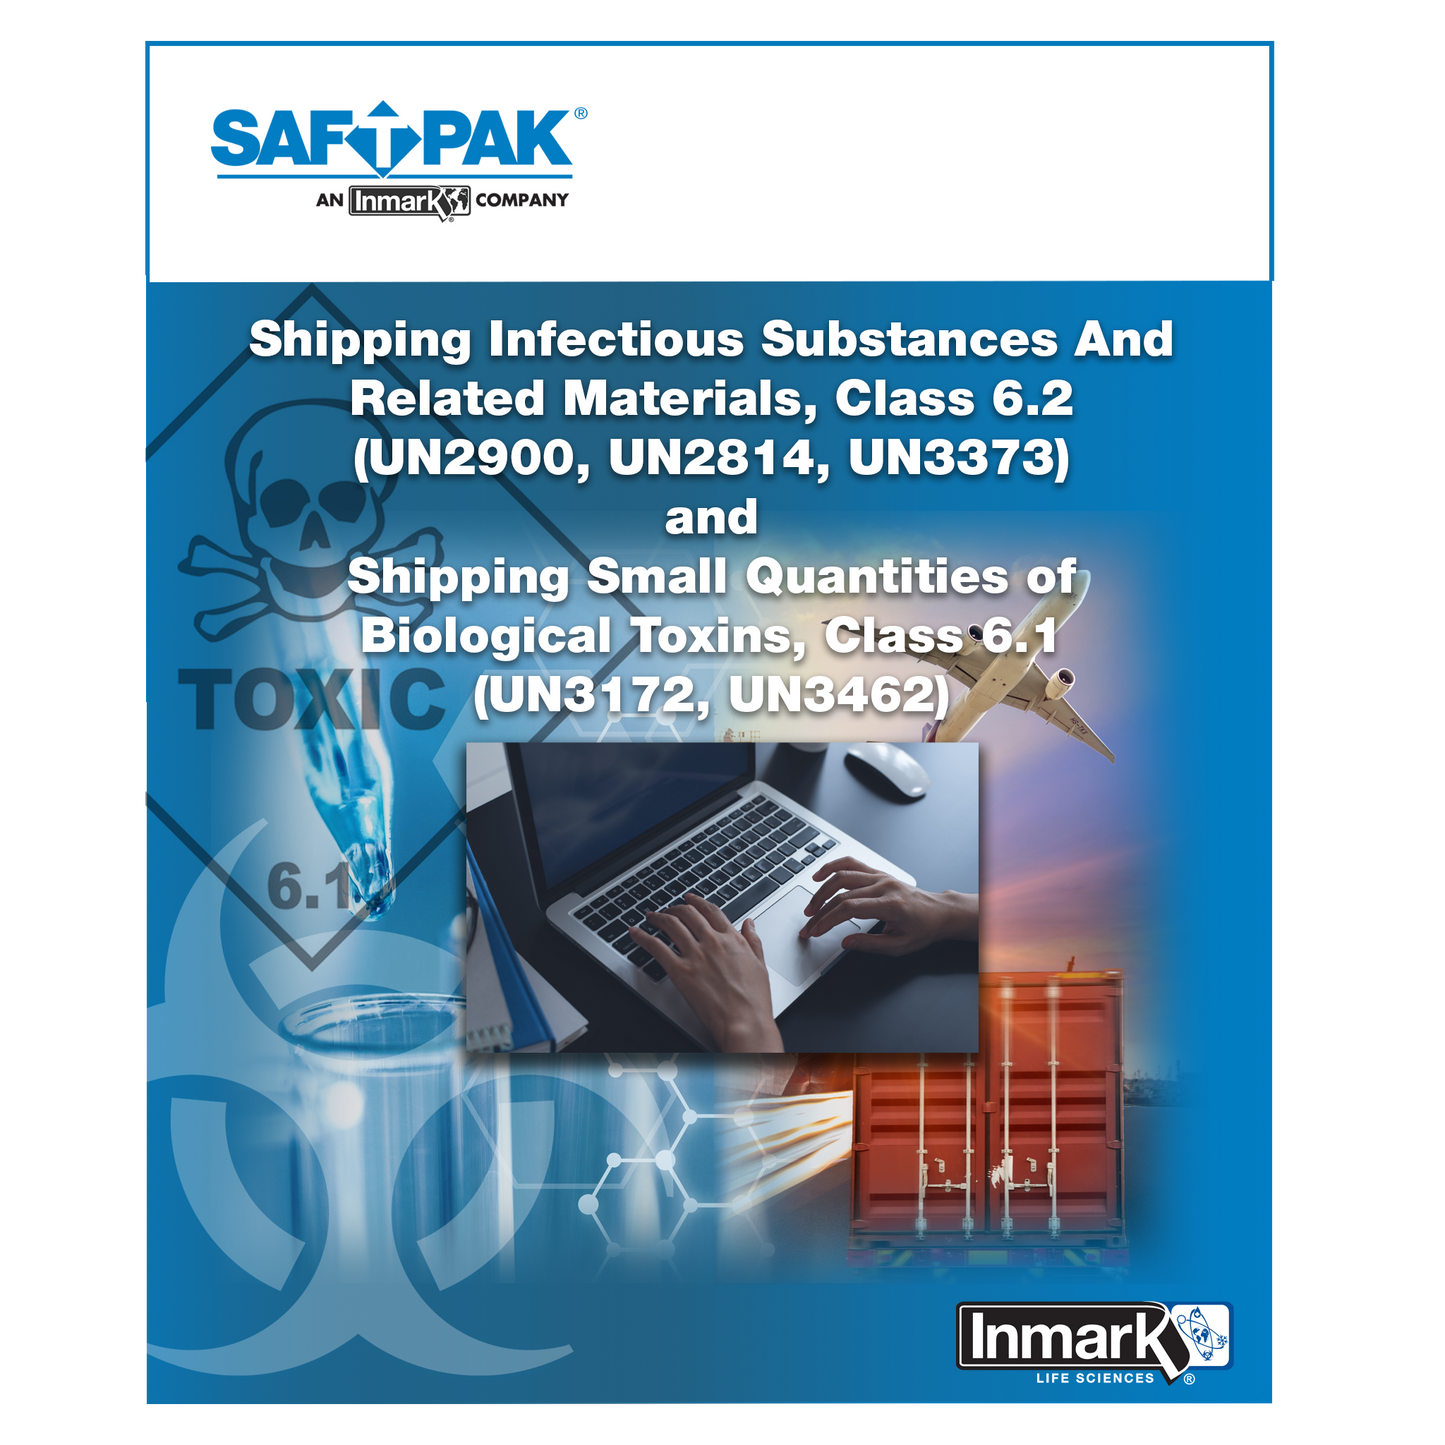 Shipping Infectious Substances and Related Materials (UN2900, UN2814, UN3373) and Shipping Small Quantities of Biological Toxins (UN3172, UN3462) Combo Online Training Course